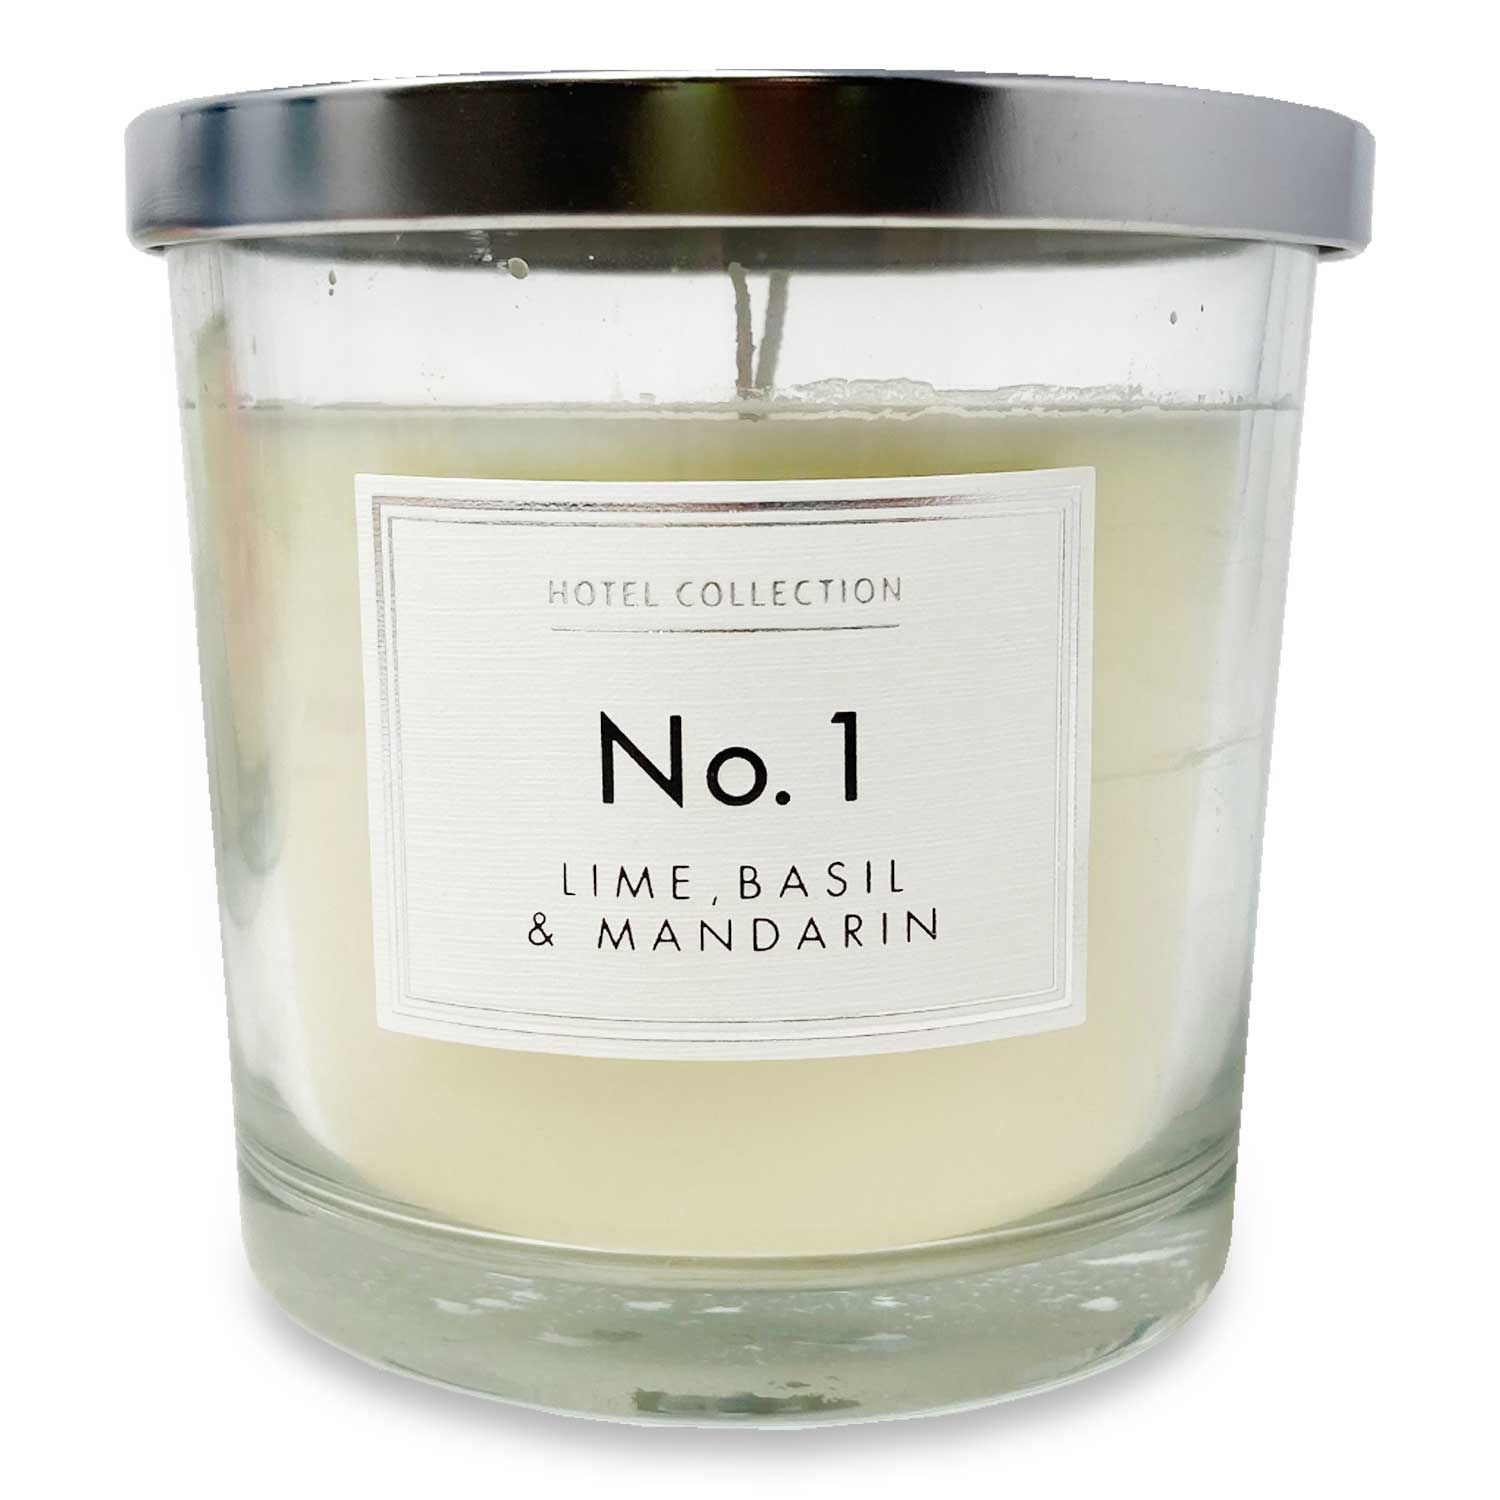 Hotel Collection N1 Lime, Basil & Mandarin Candle 335g RRP 3.49 CLEARANCE XL 2.99